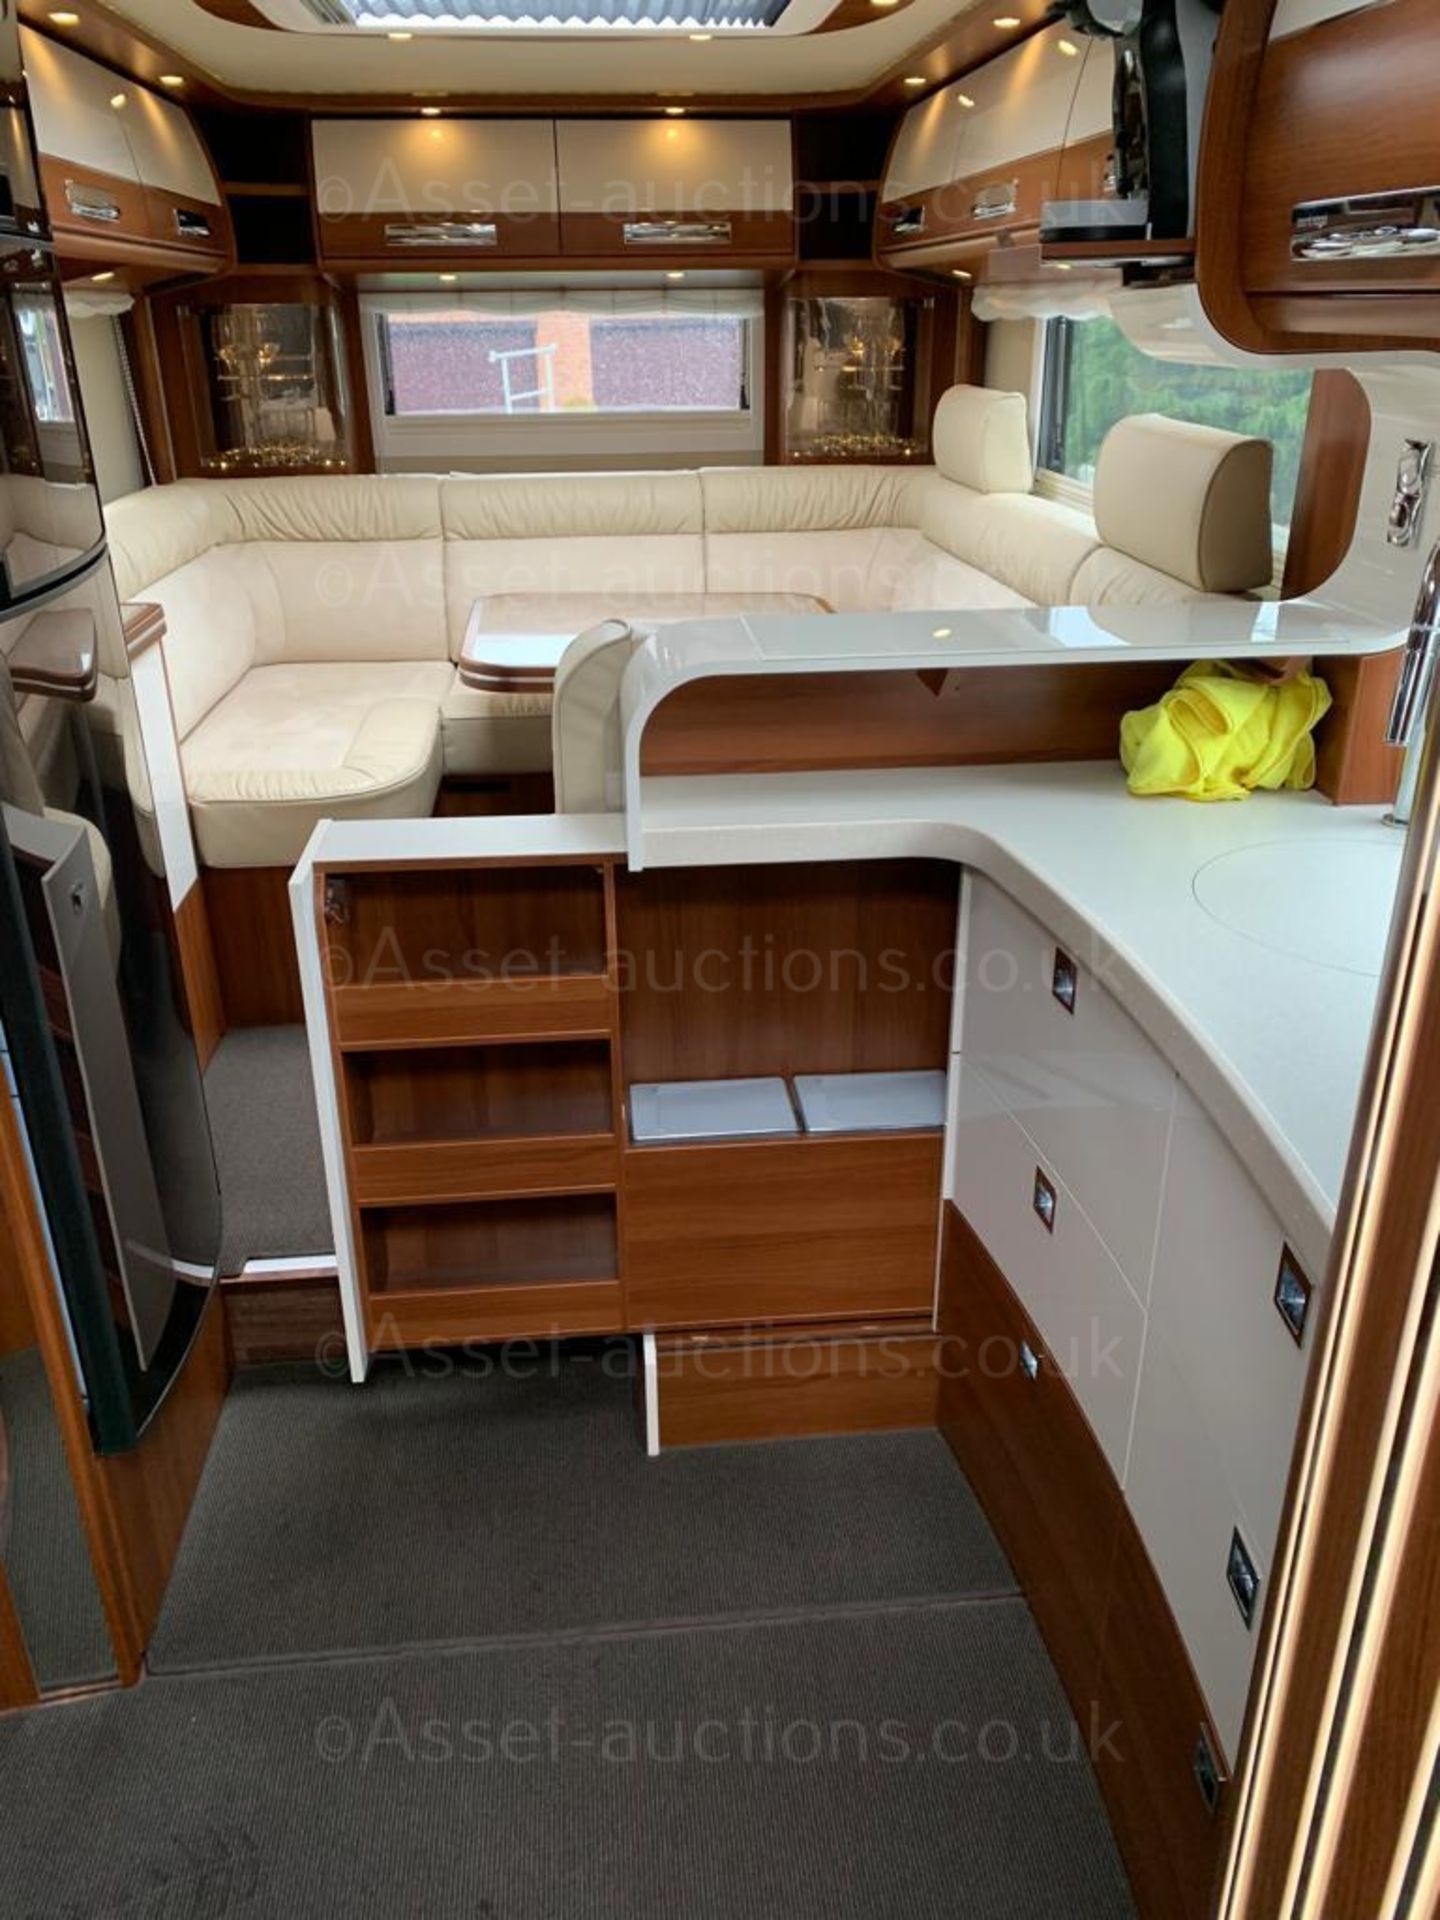 2020 CARTHAGO LINER-FOR-TWO 53L MOTORHOME, SHOWING 4529 MILES, MINT CONDITION *NO VAT* - Image 30 of 33